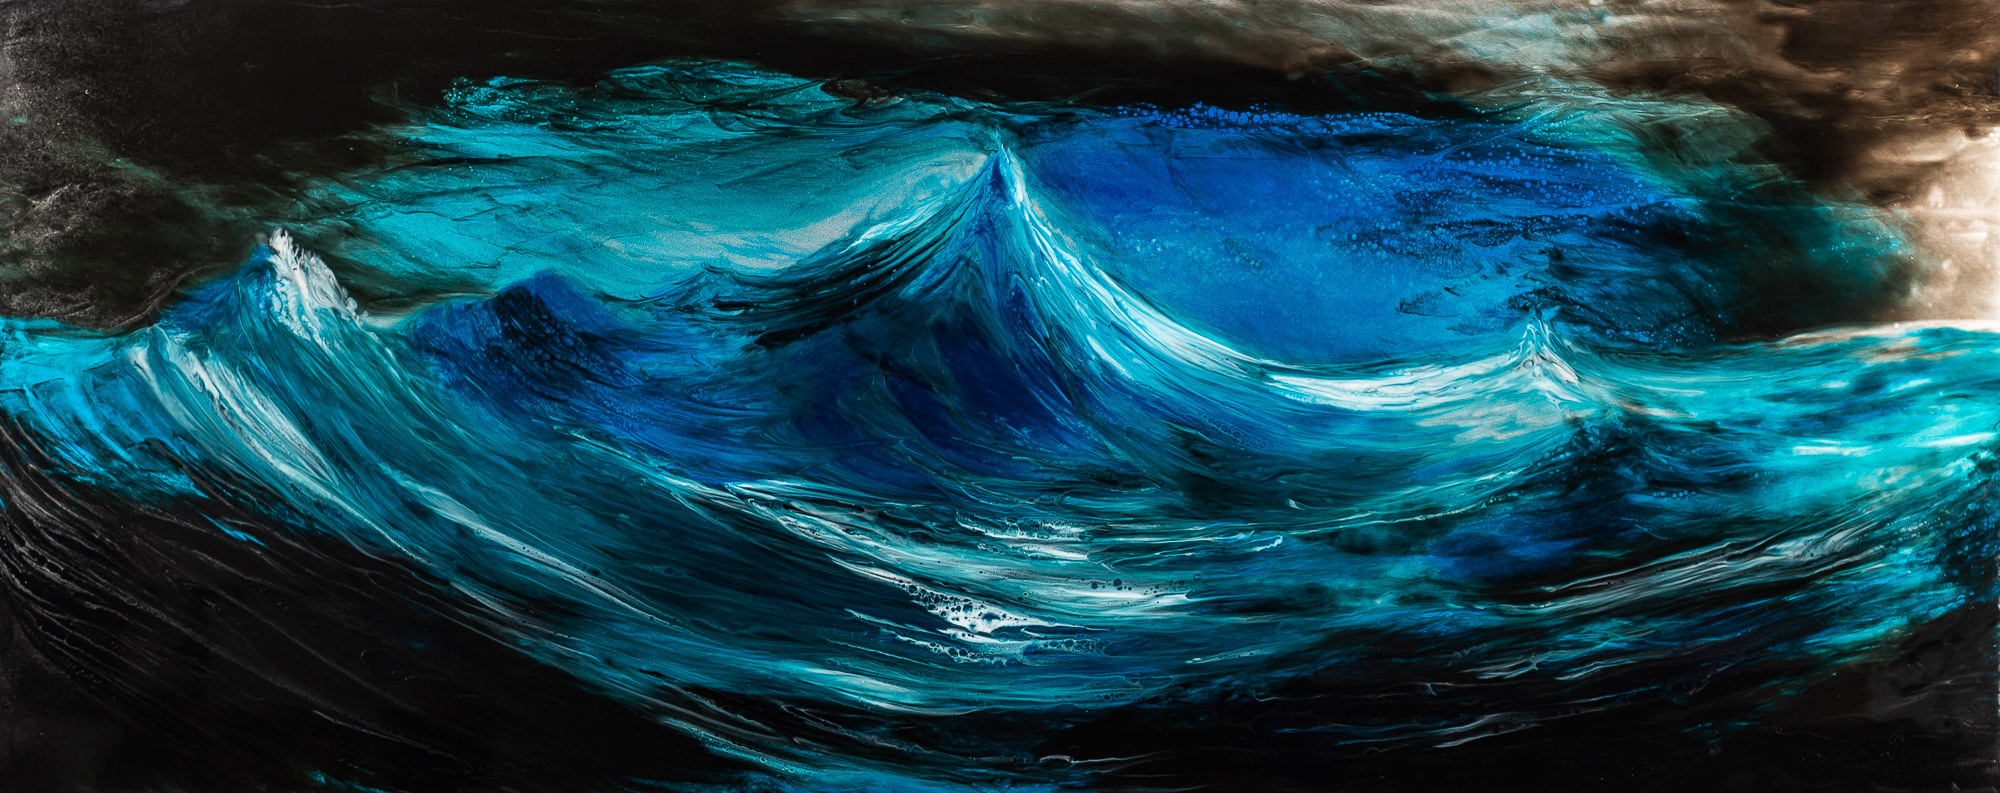 Rising Swell by Paul Kenton, UK Contemporary artist, an Original Resin Seascape Painting from his Seascapes and Mountainscapes art collection